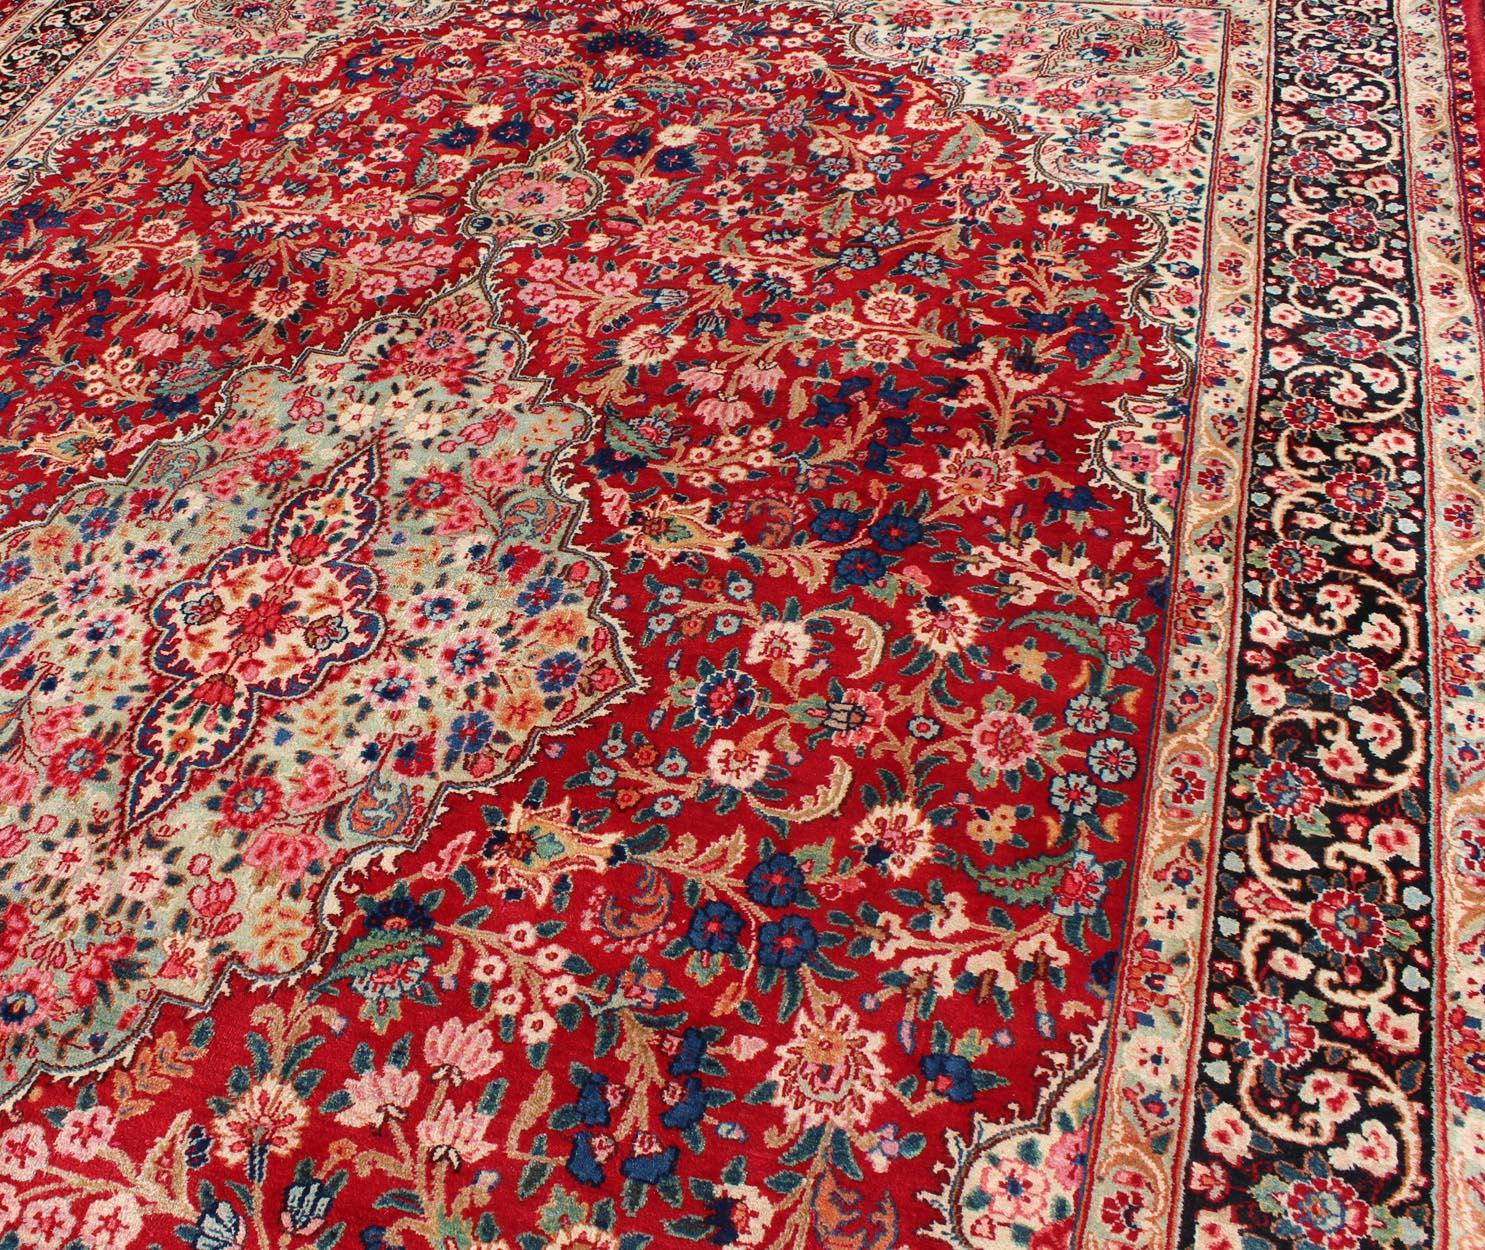 Vintage Persian Mashad Rug with Ornate Floral Medallion Design in Red and Cream In Good Condition For Sale In Atlanta, GA